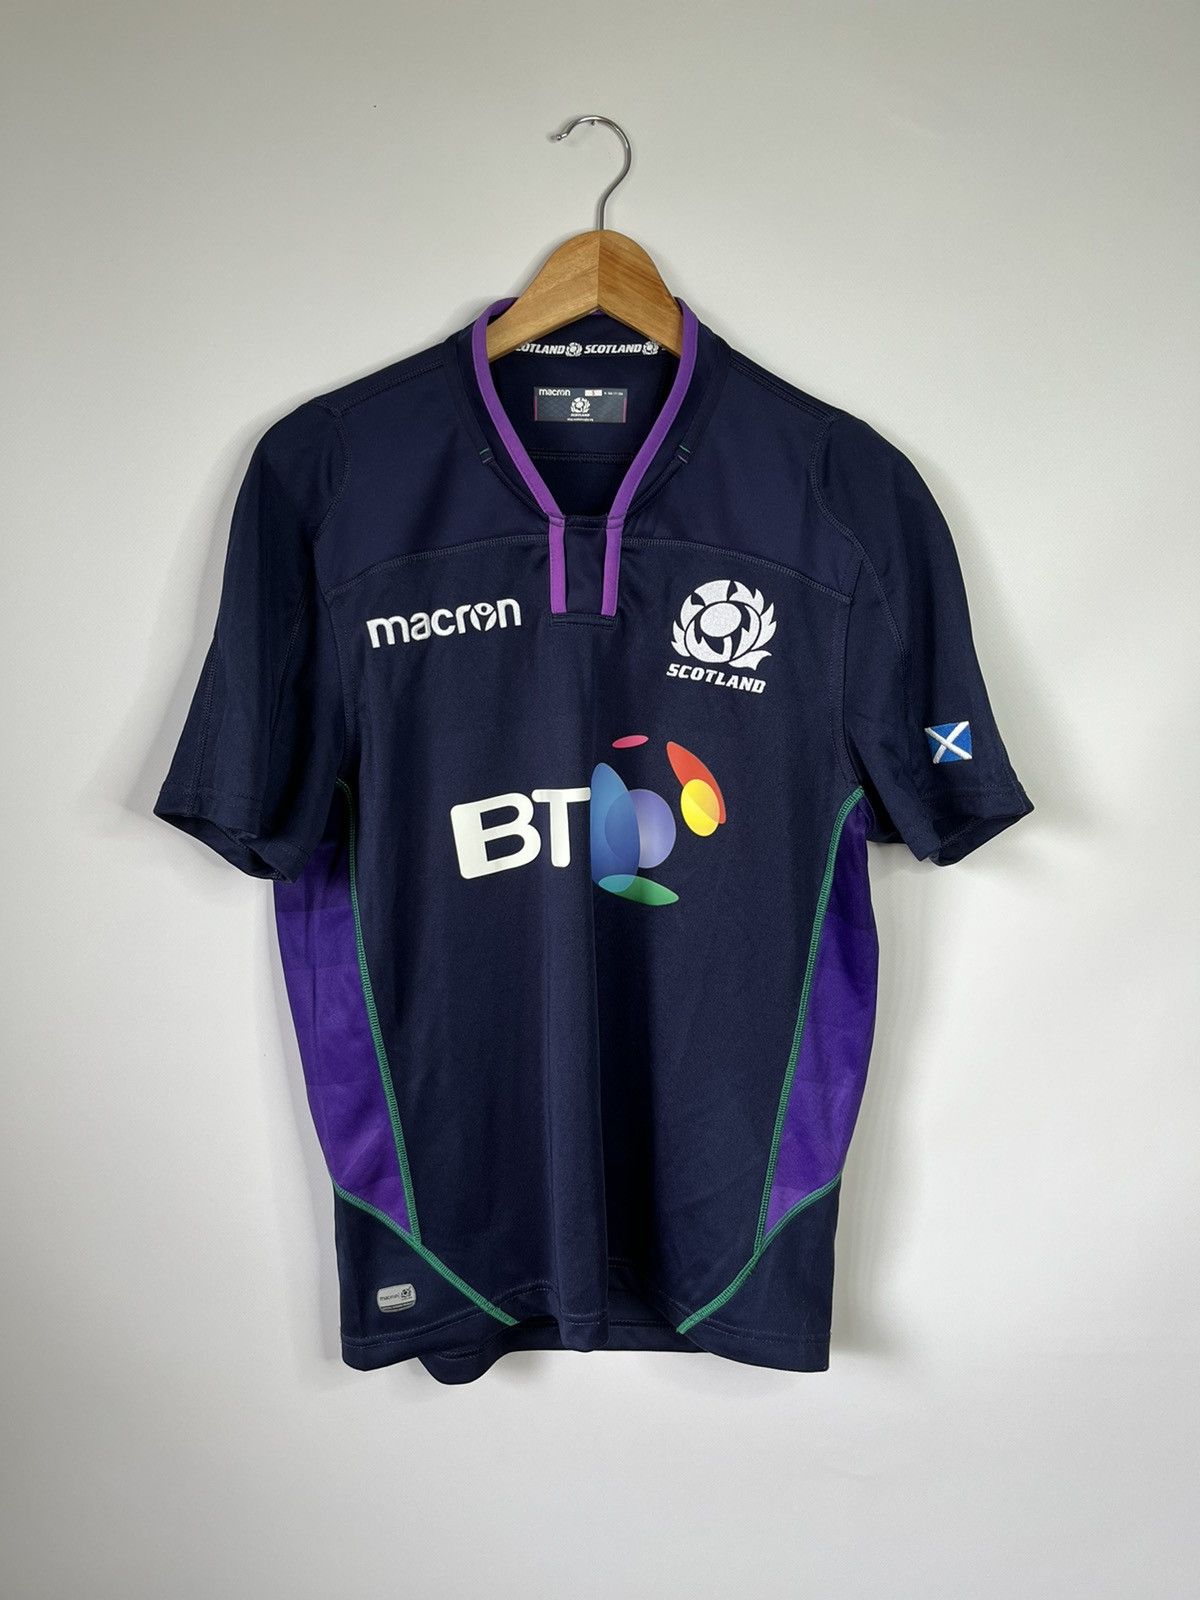 Jersey Scotland National Team Rugby Jersey Shirt Macron Size S Size US S / EU 44-46 / 1 - 1 Preview